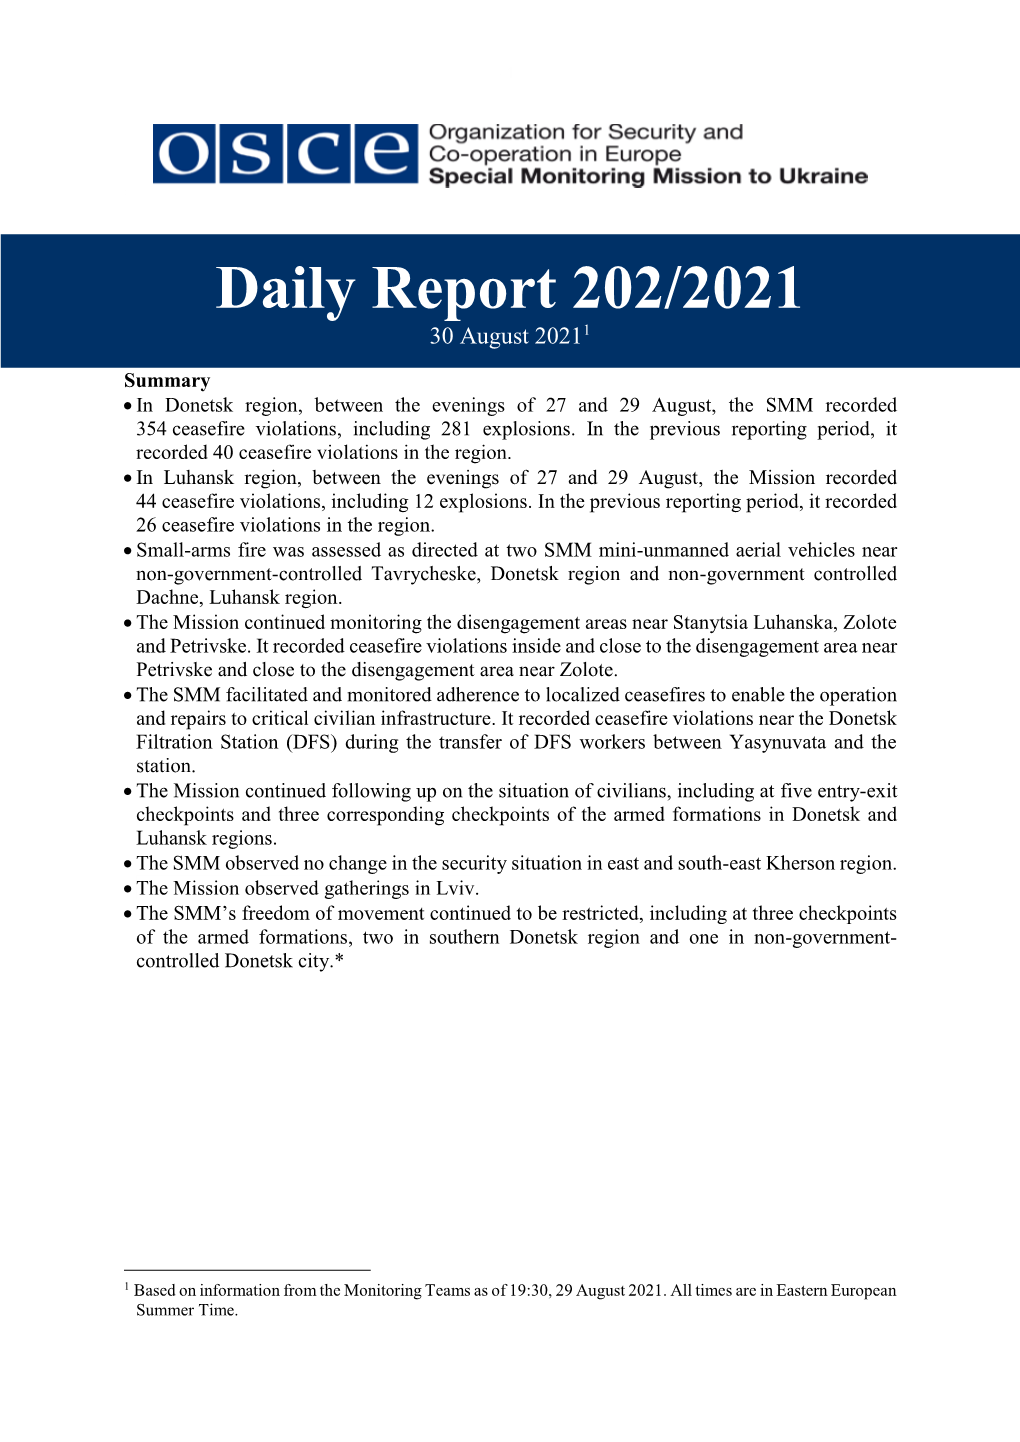 Daily Report 202/2021 30 August 20211